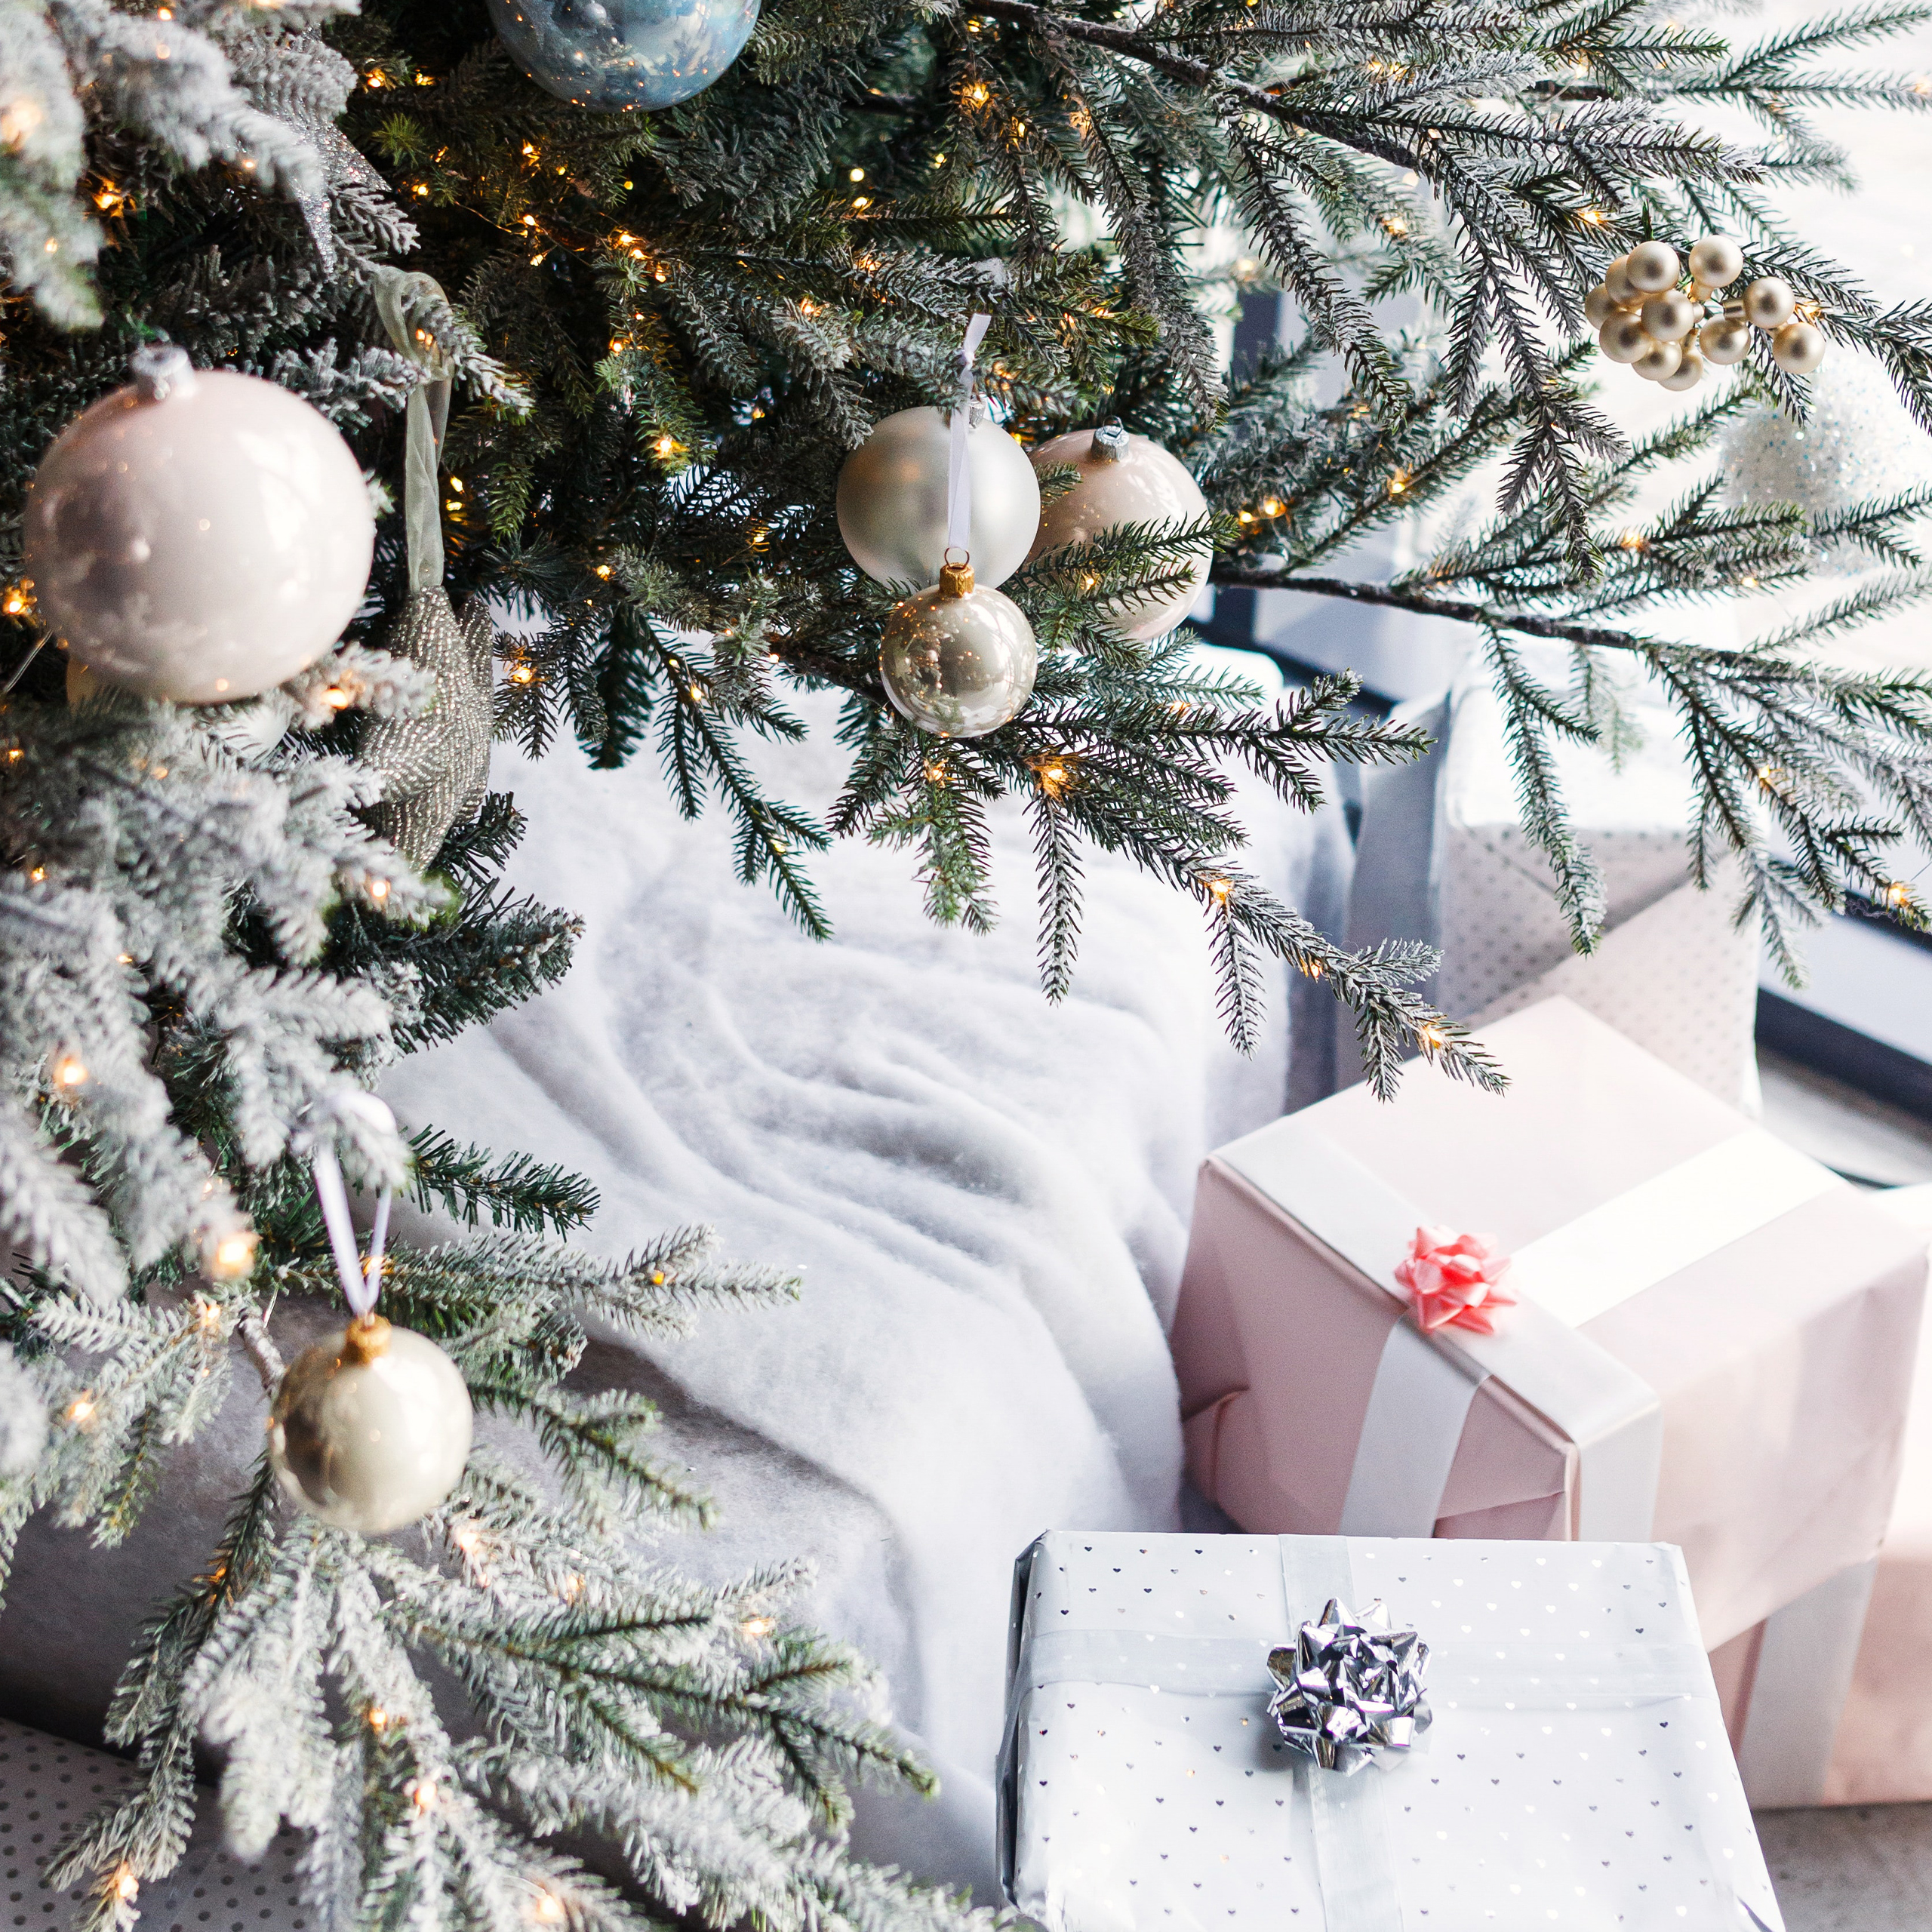 Christmas presents under a tree, with a white snowy theme